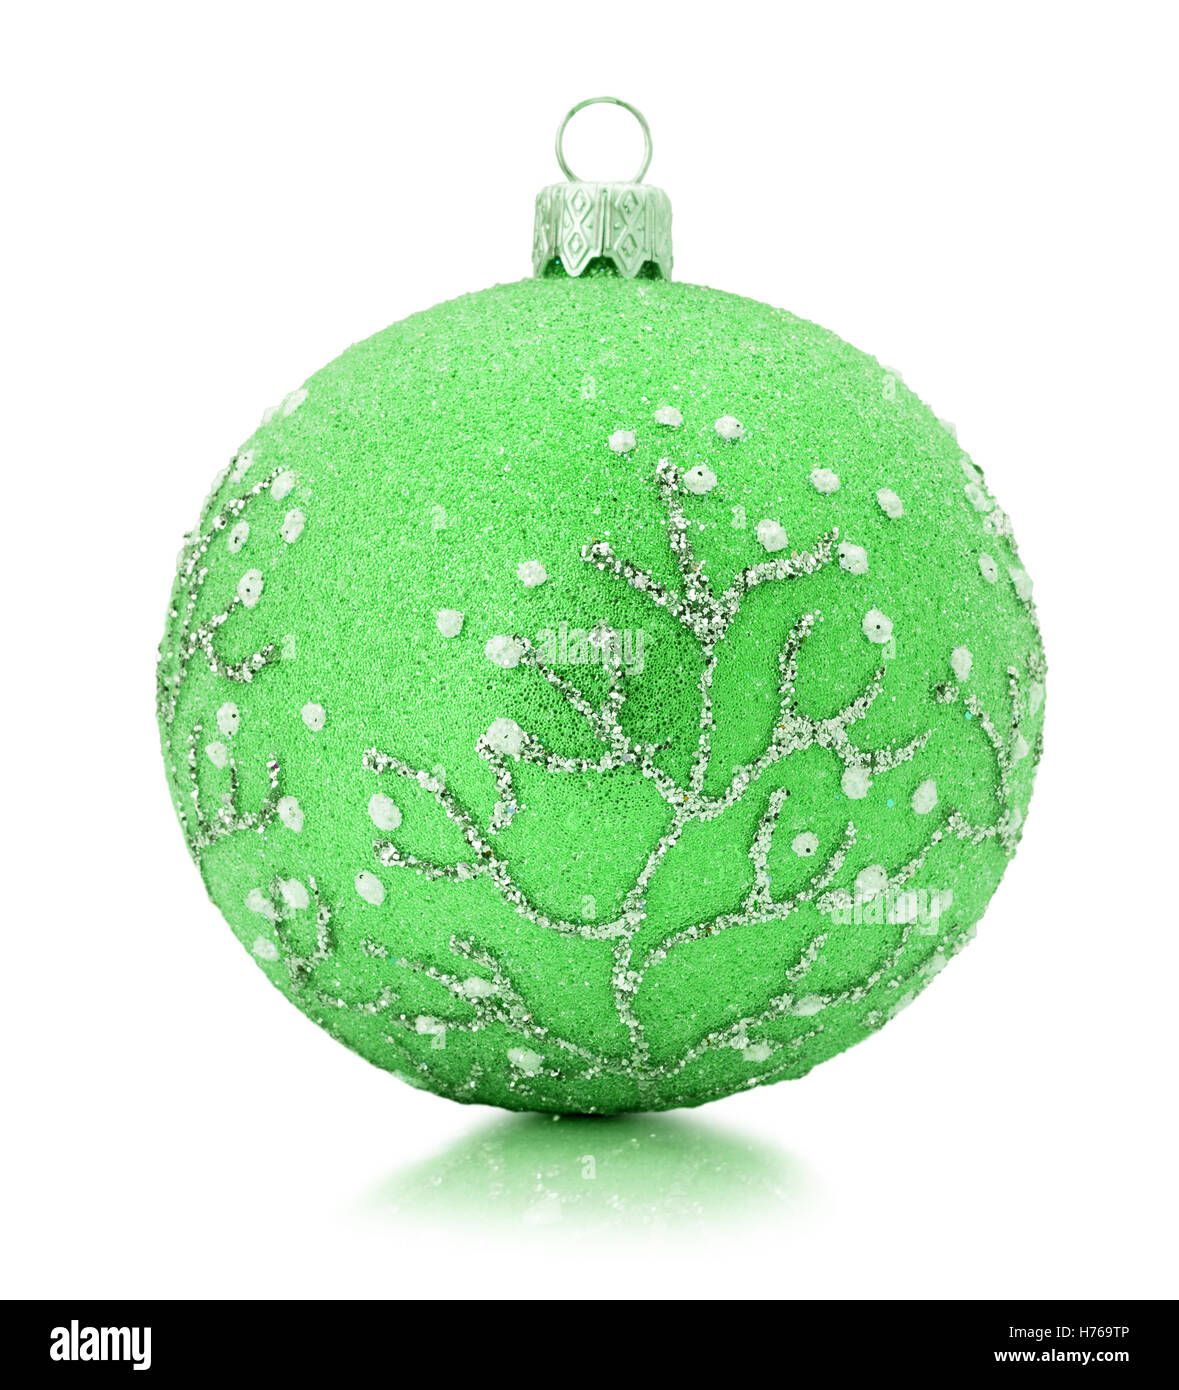 green Christmas tree ball isolated on the white background. Stock Photo